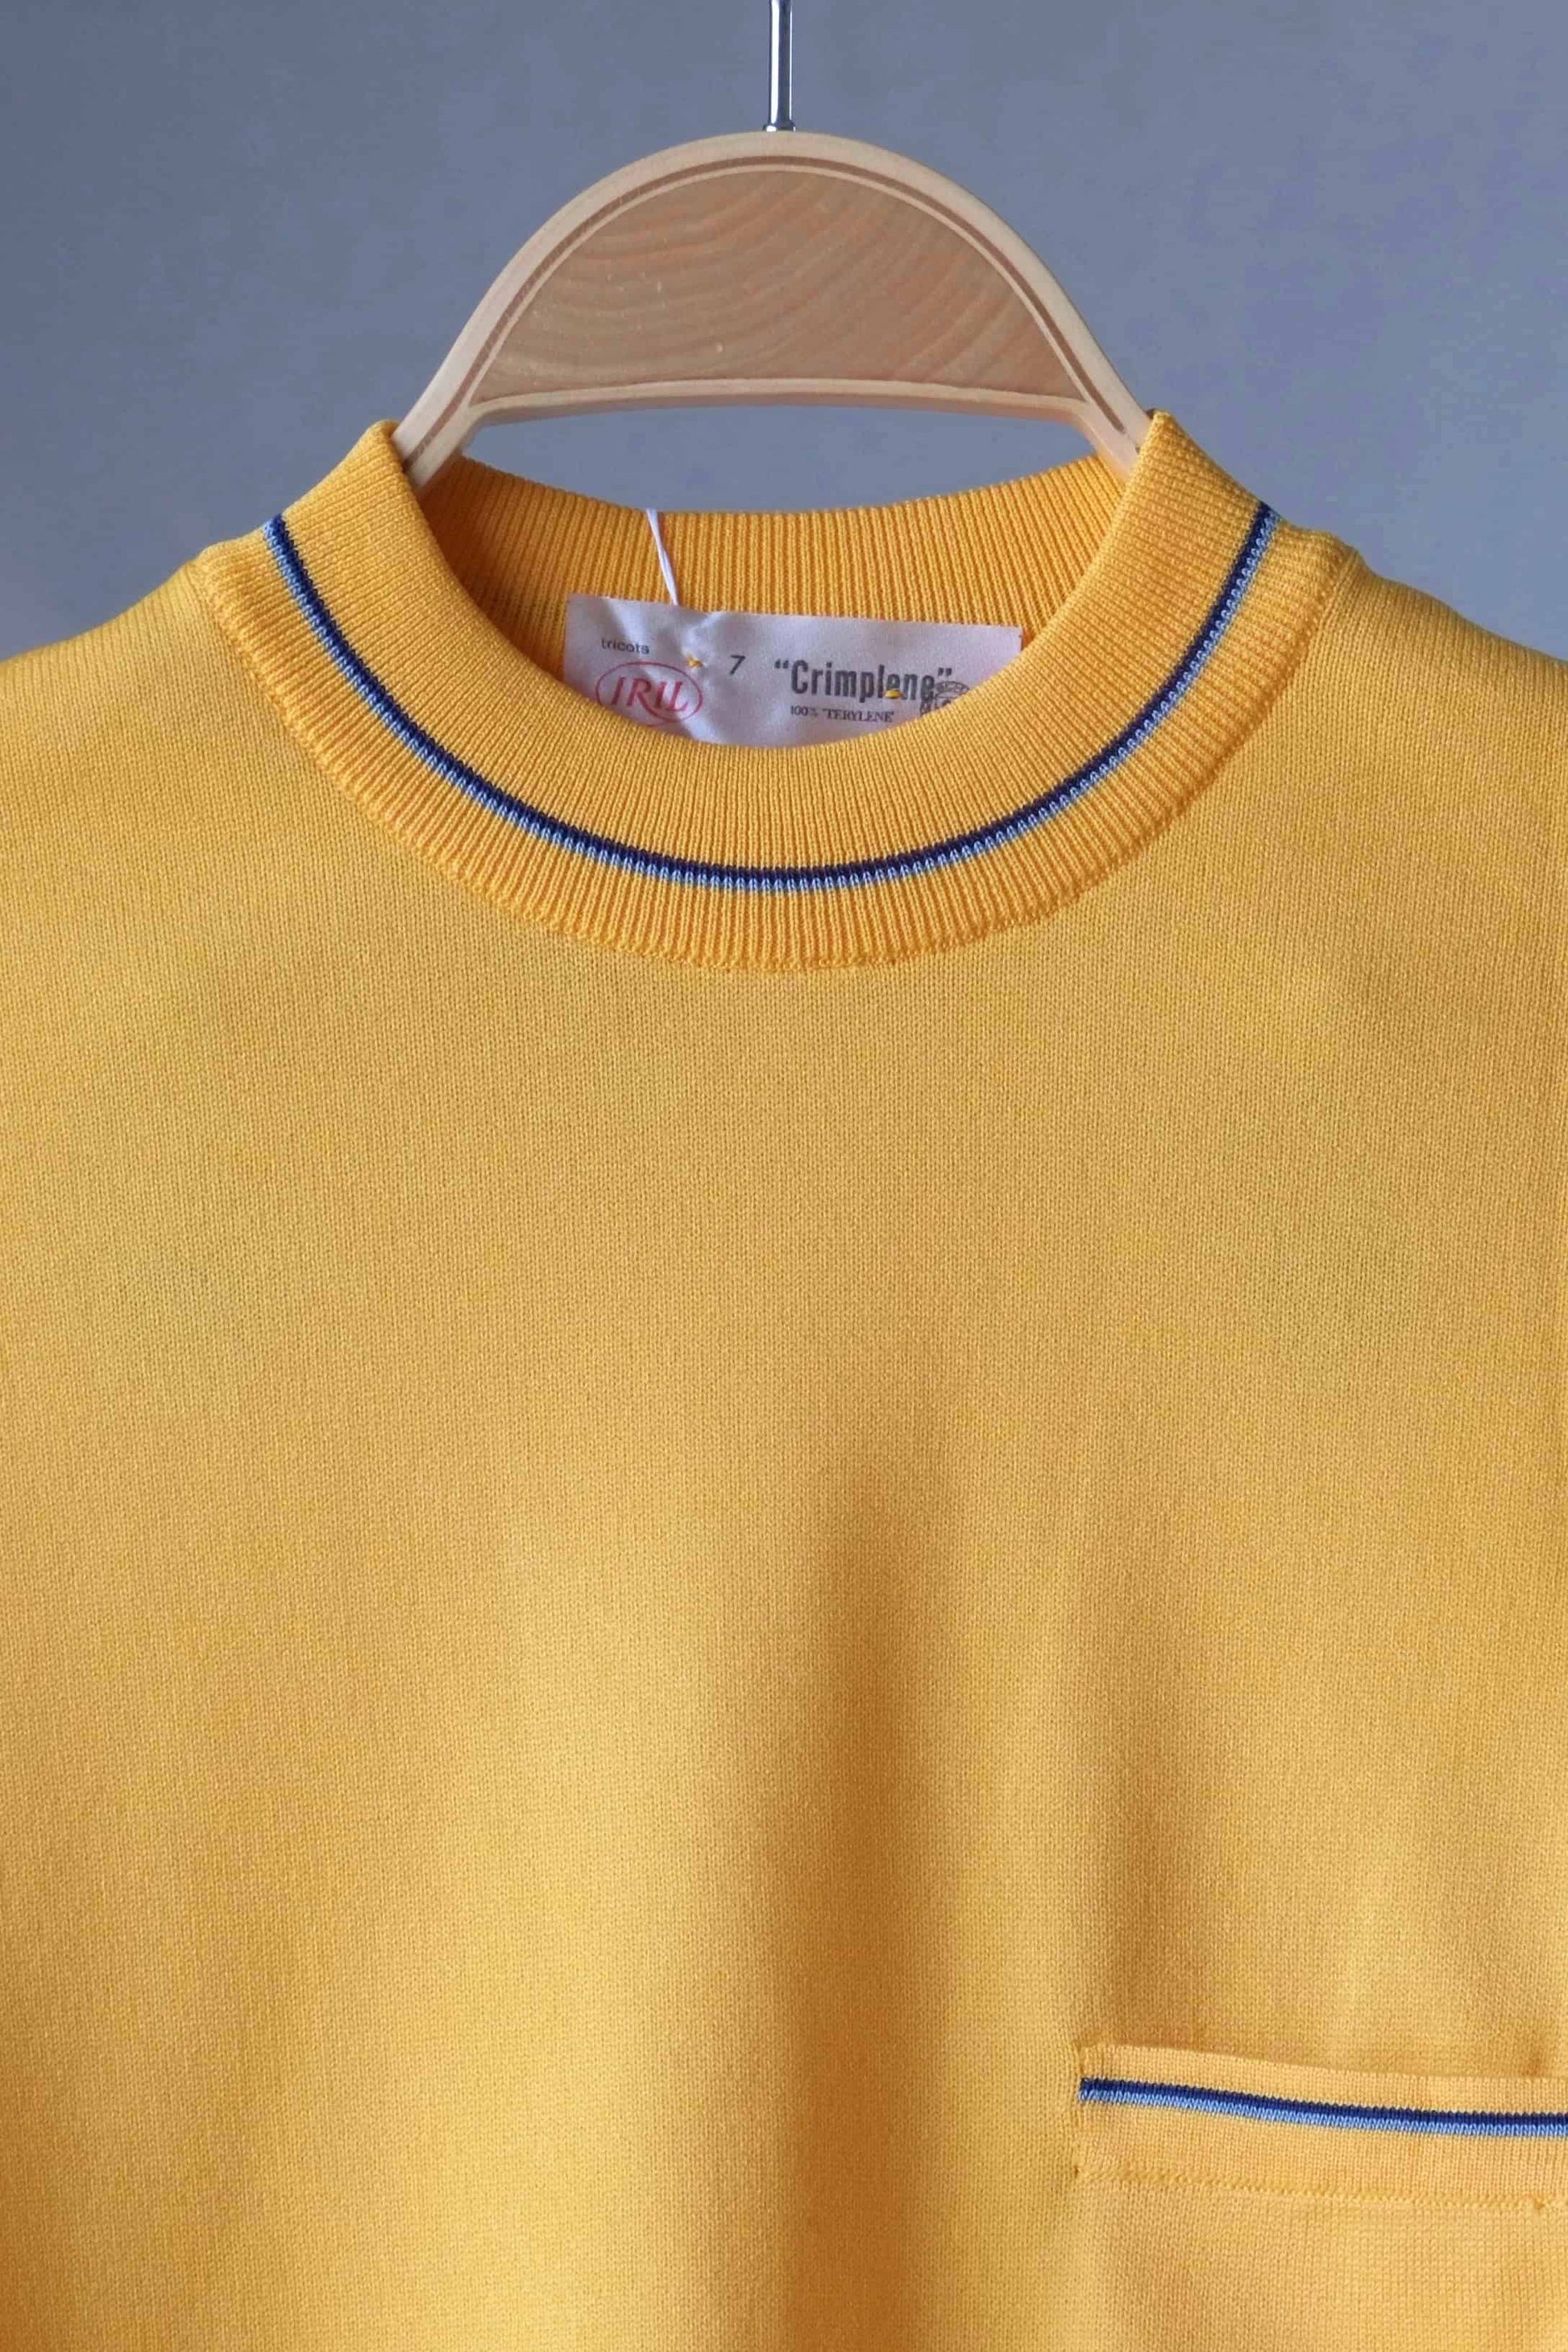 70's Crew Neck Knit Top yellow close up